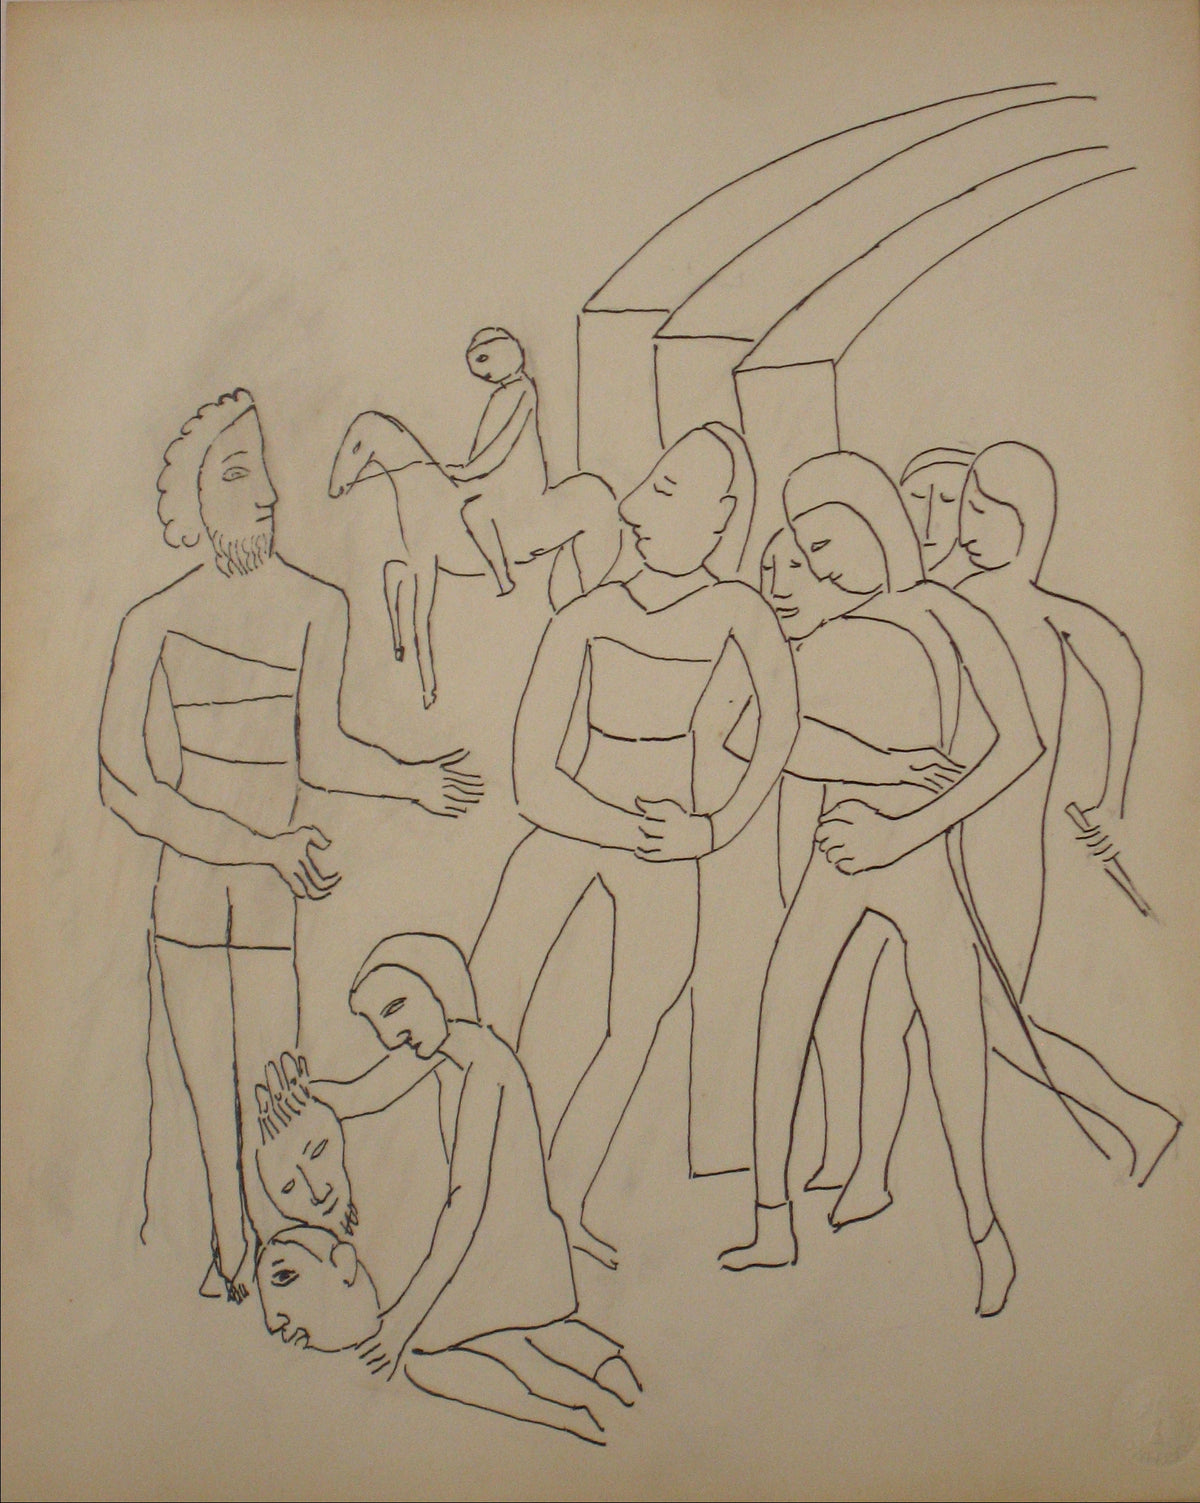 Expressionist Biblical Figure Scene &lt;br&gt;Early to Mid 20th Century Ink on Paper &lt;br&gt;&lt;br&gt;#14200